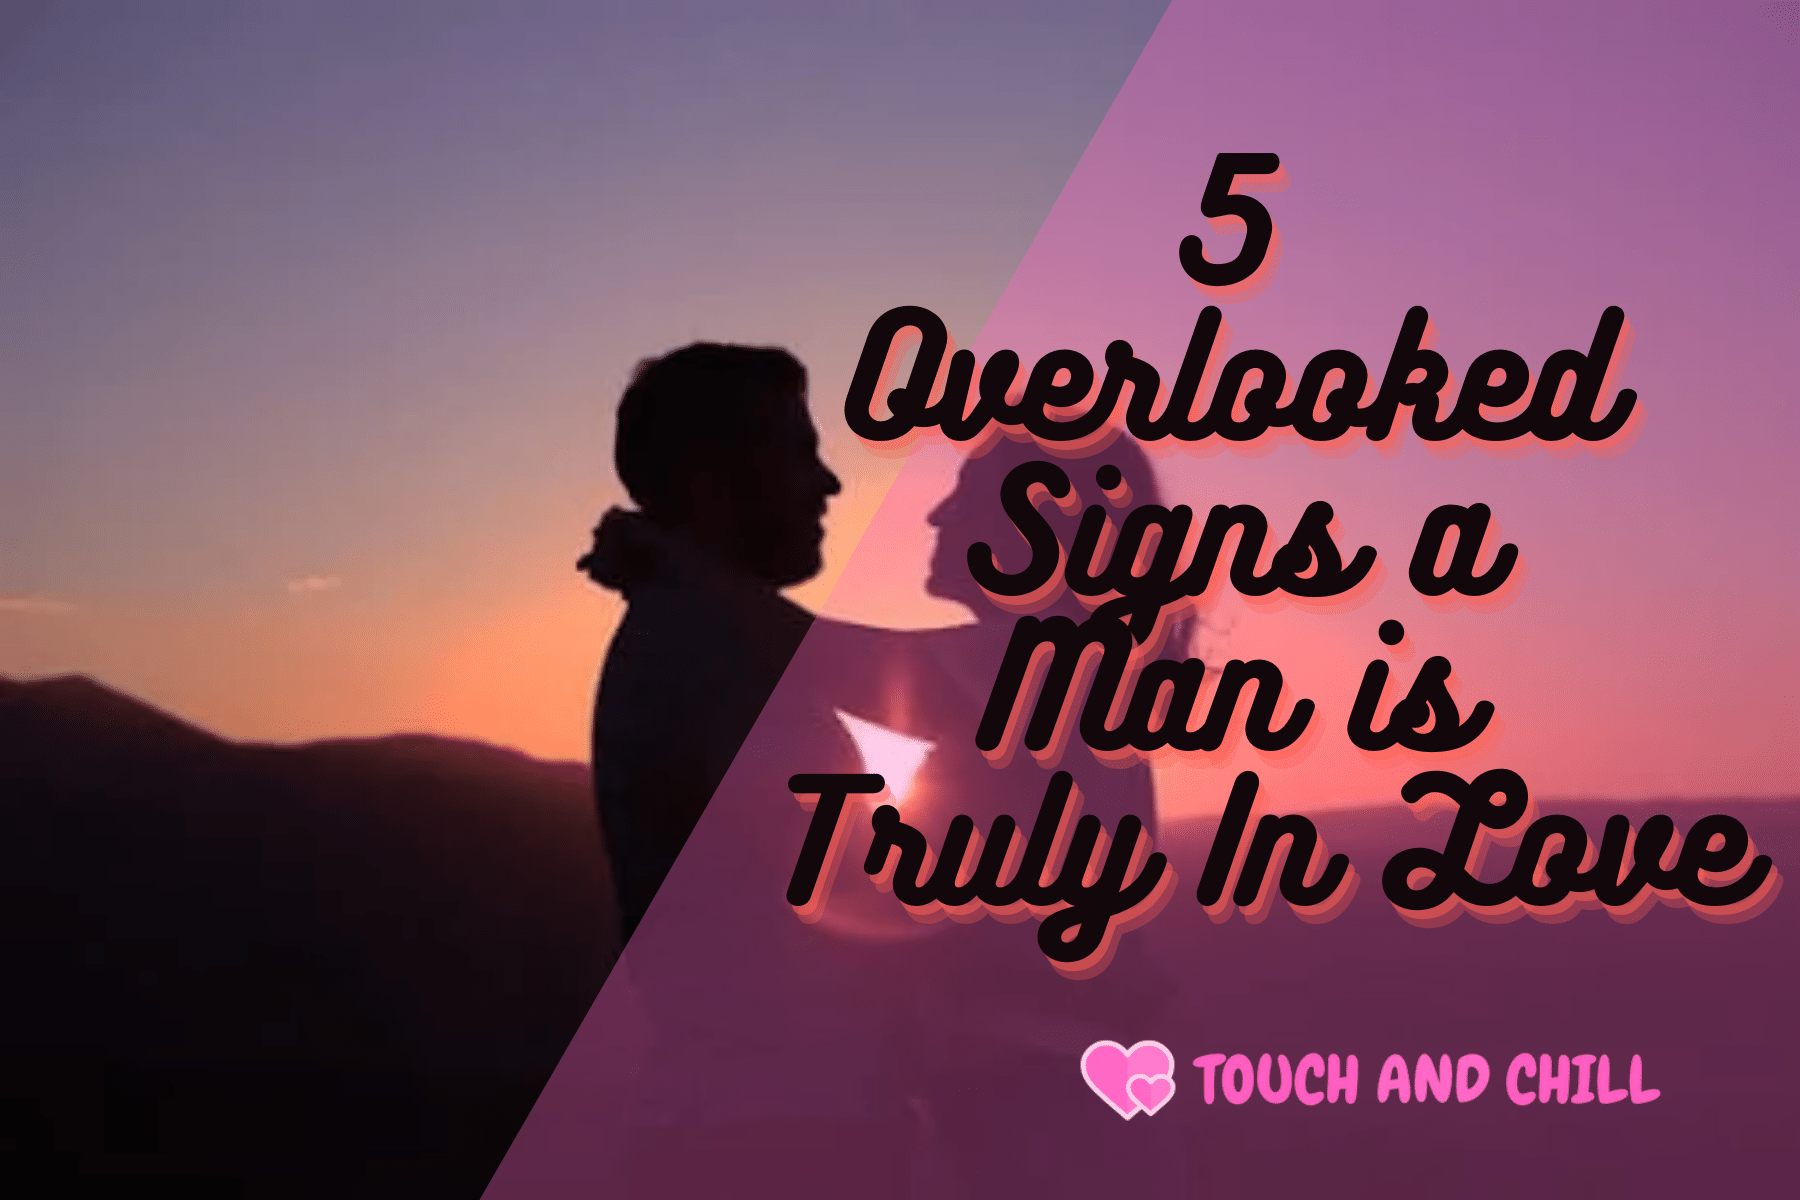 5 Overlooked Signs a Man is Truly In Love